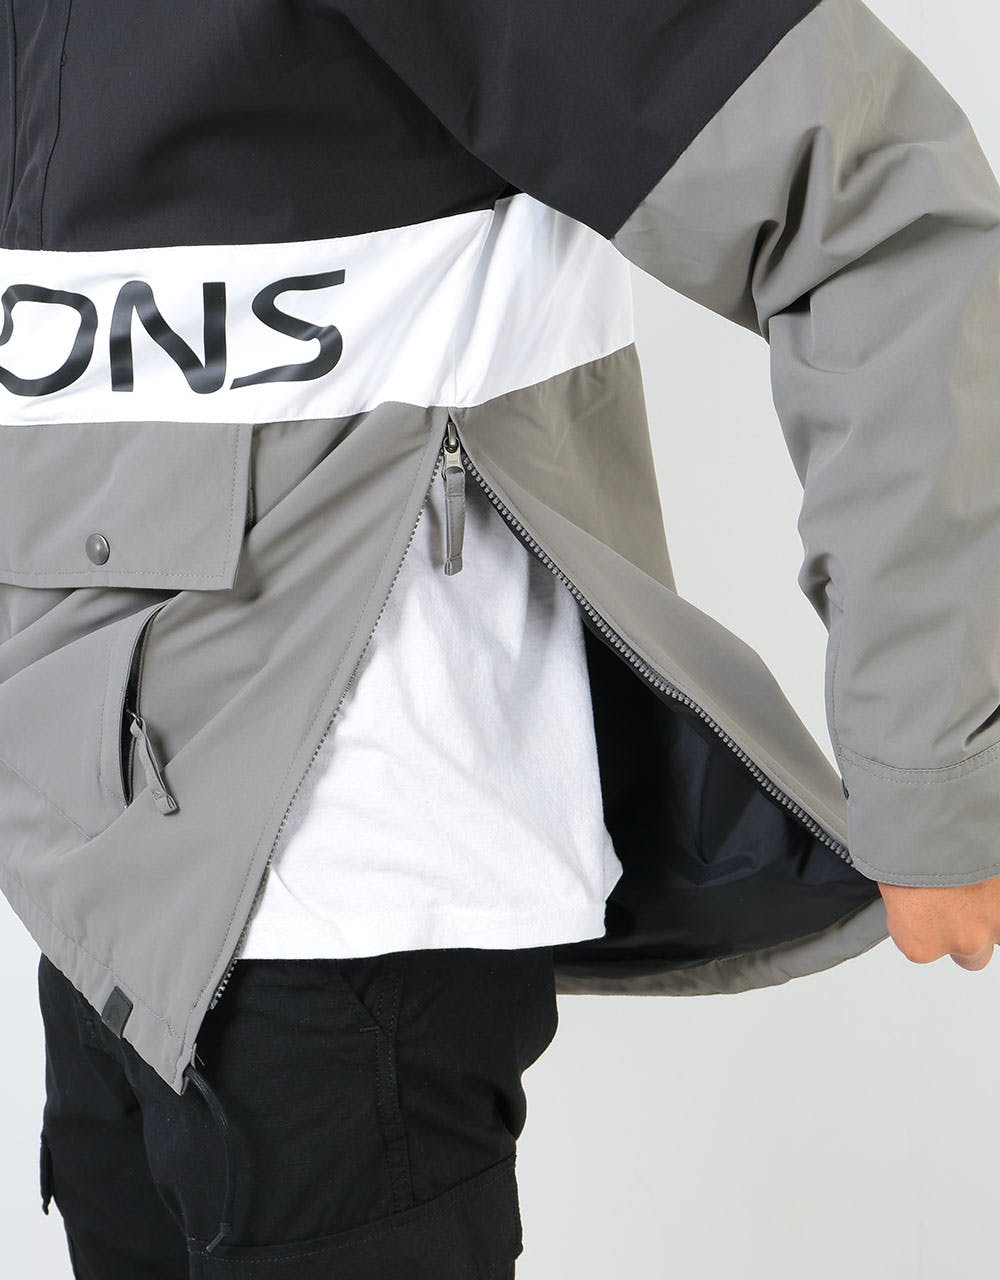 Sessions Chaos Pullover 2020 Snowboard Jacket - Black